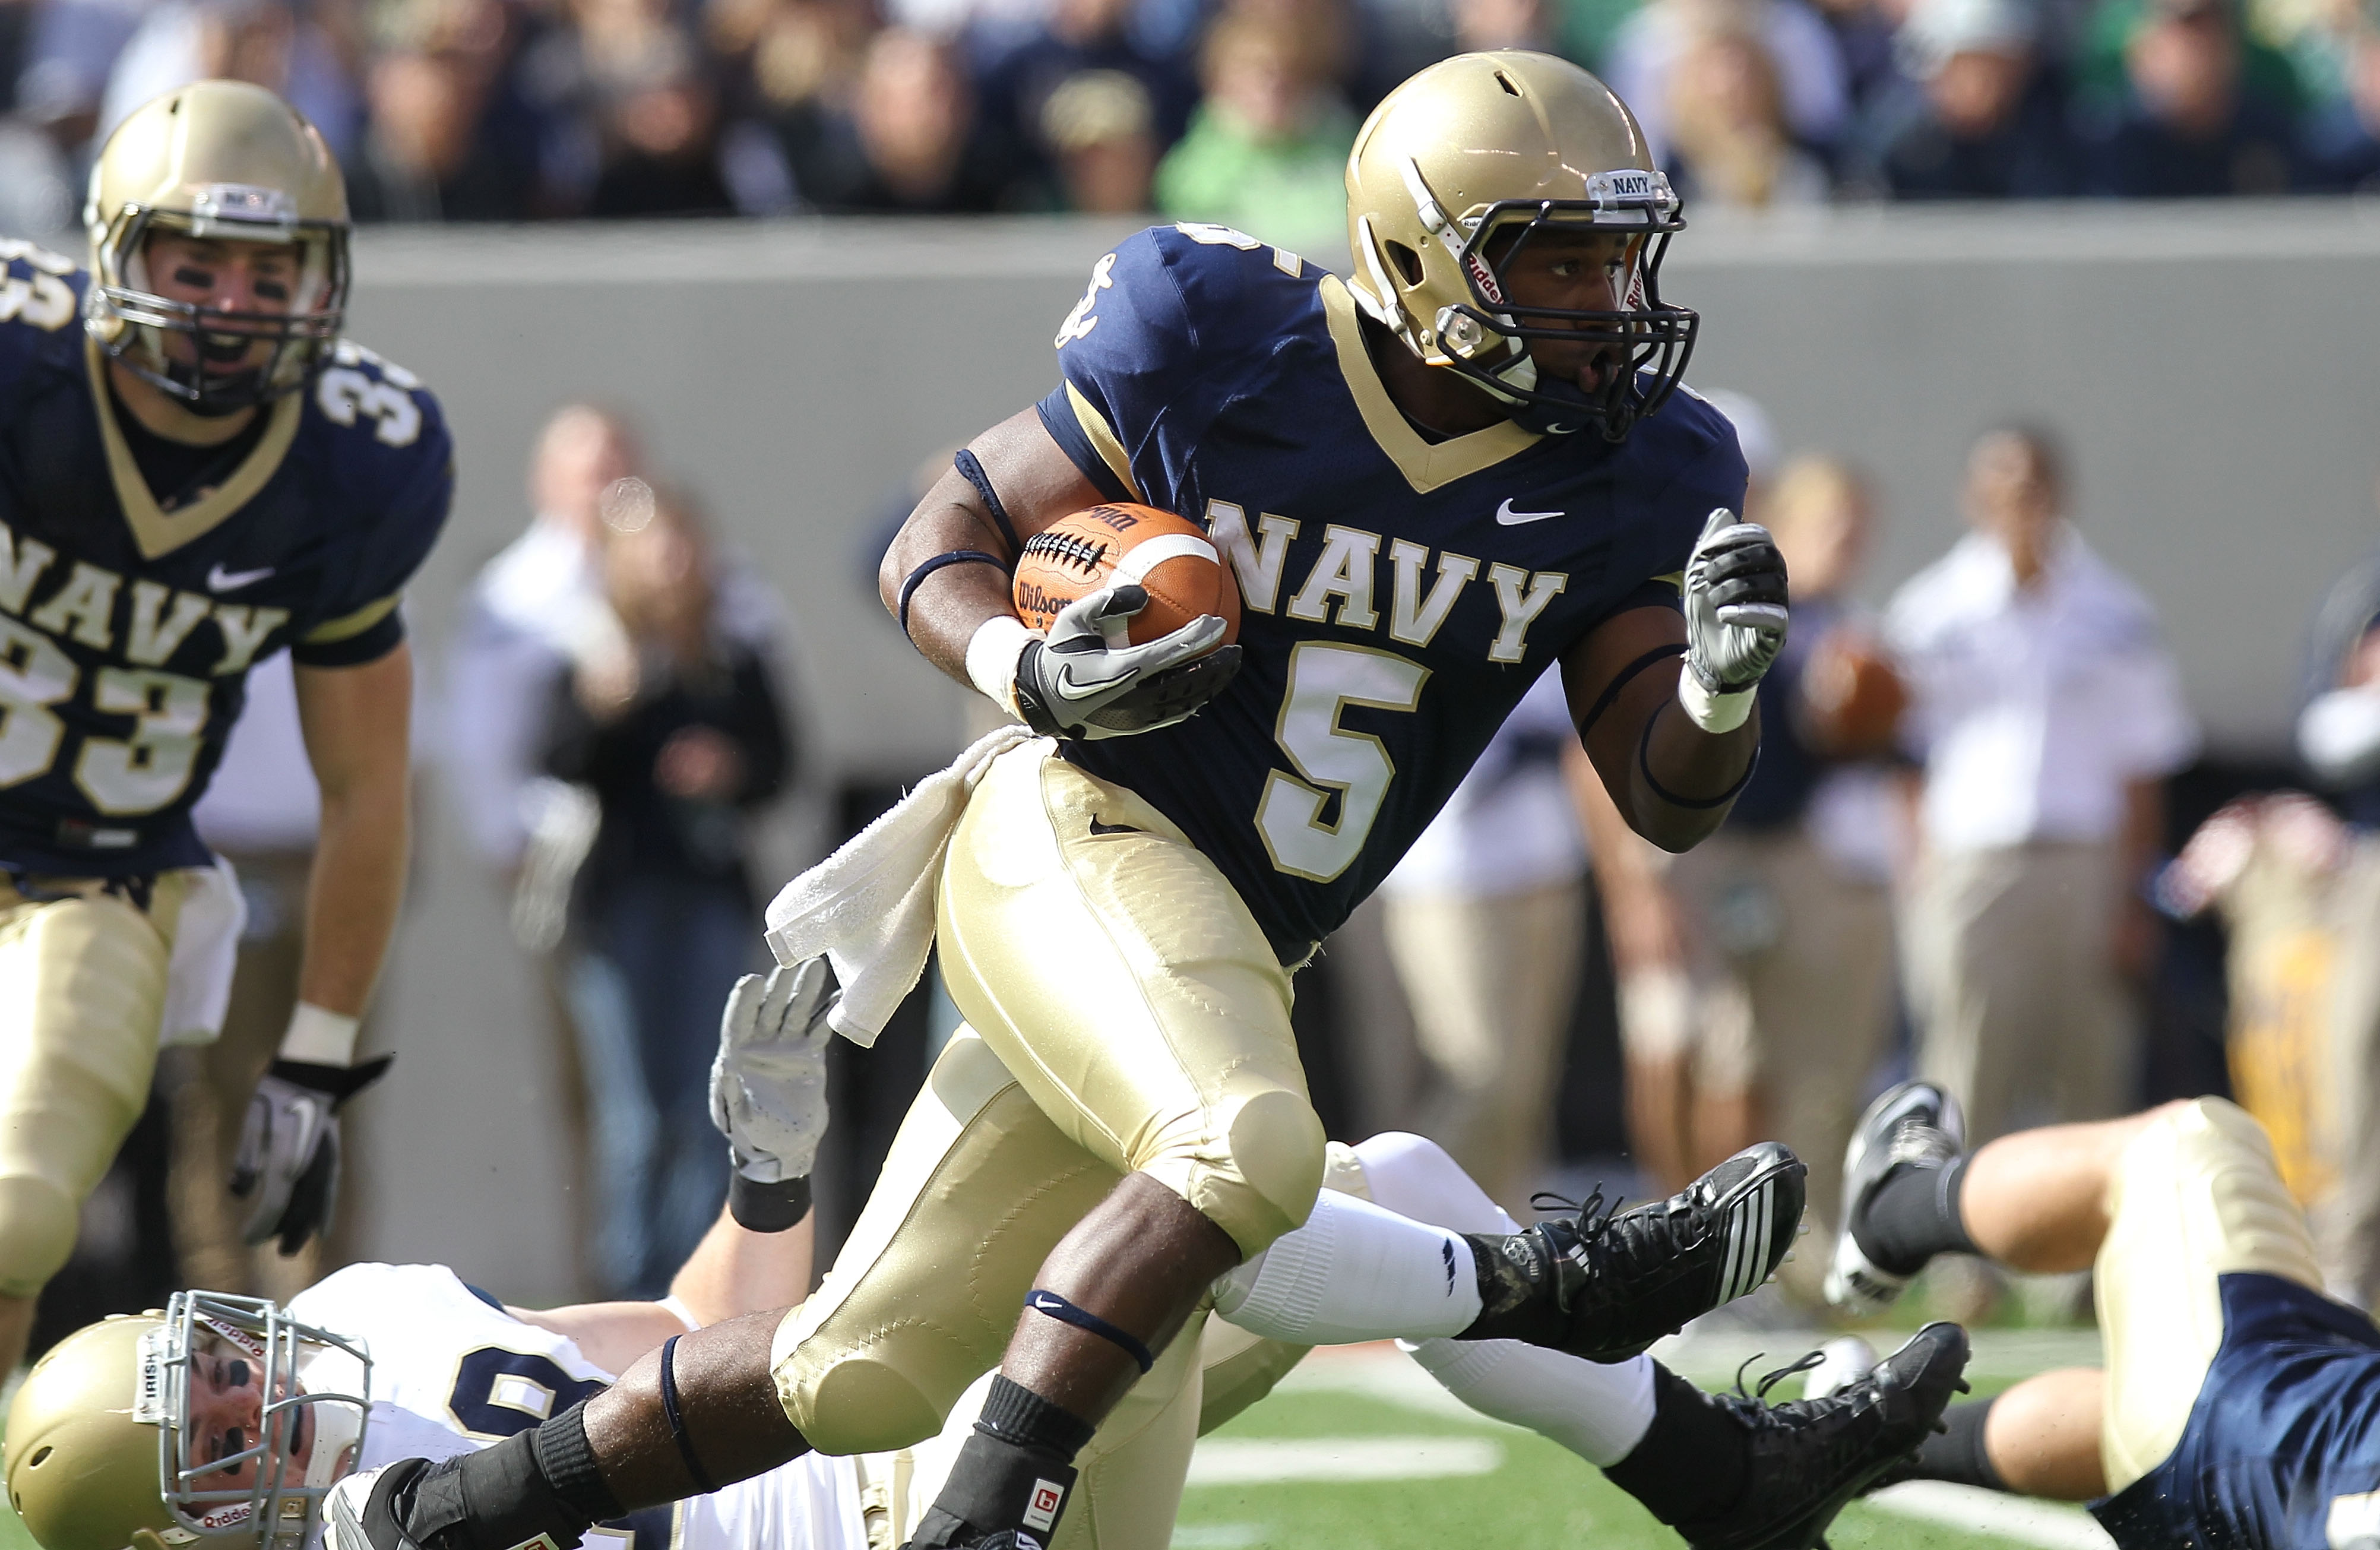 EAST RUTHERFORD, NJ - OCTOBER 23:  Patrick Mealy #5 of the Navy Midshipmen rushes against the Notre Dame Fighting Irish at New Meadowlands Stadium on October 23, 2010 in East Rutherford, New Jersey.  (Photo by Nick Laham/Getty Images)